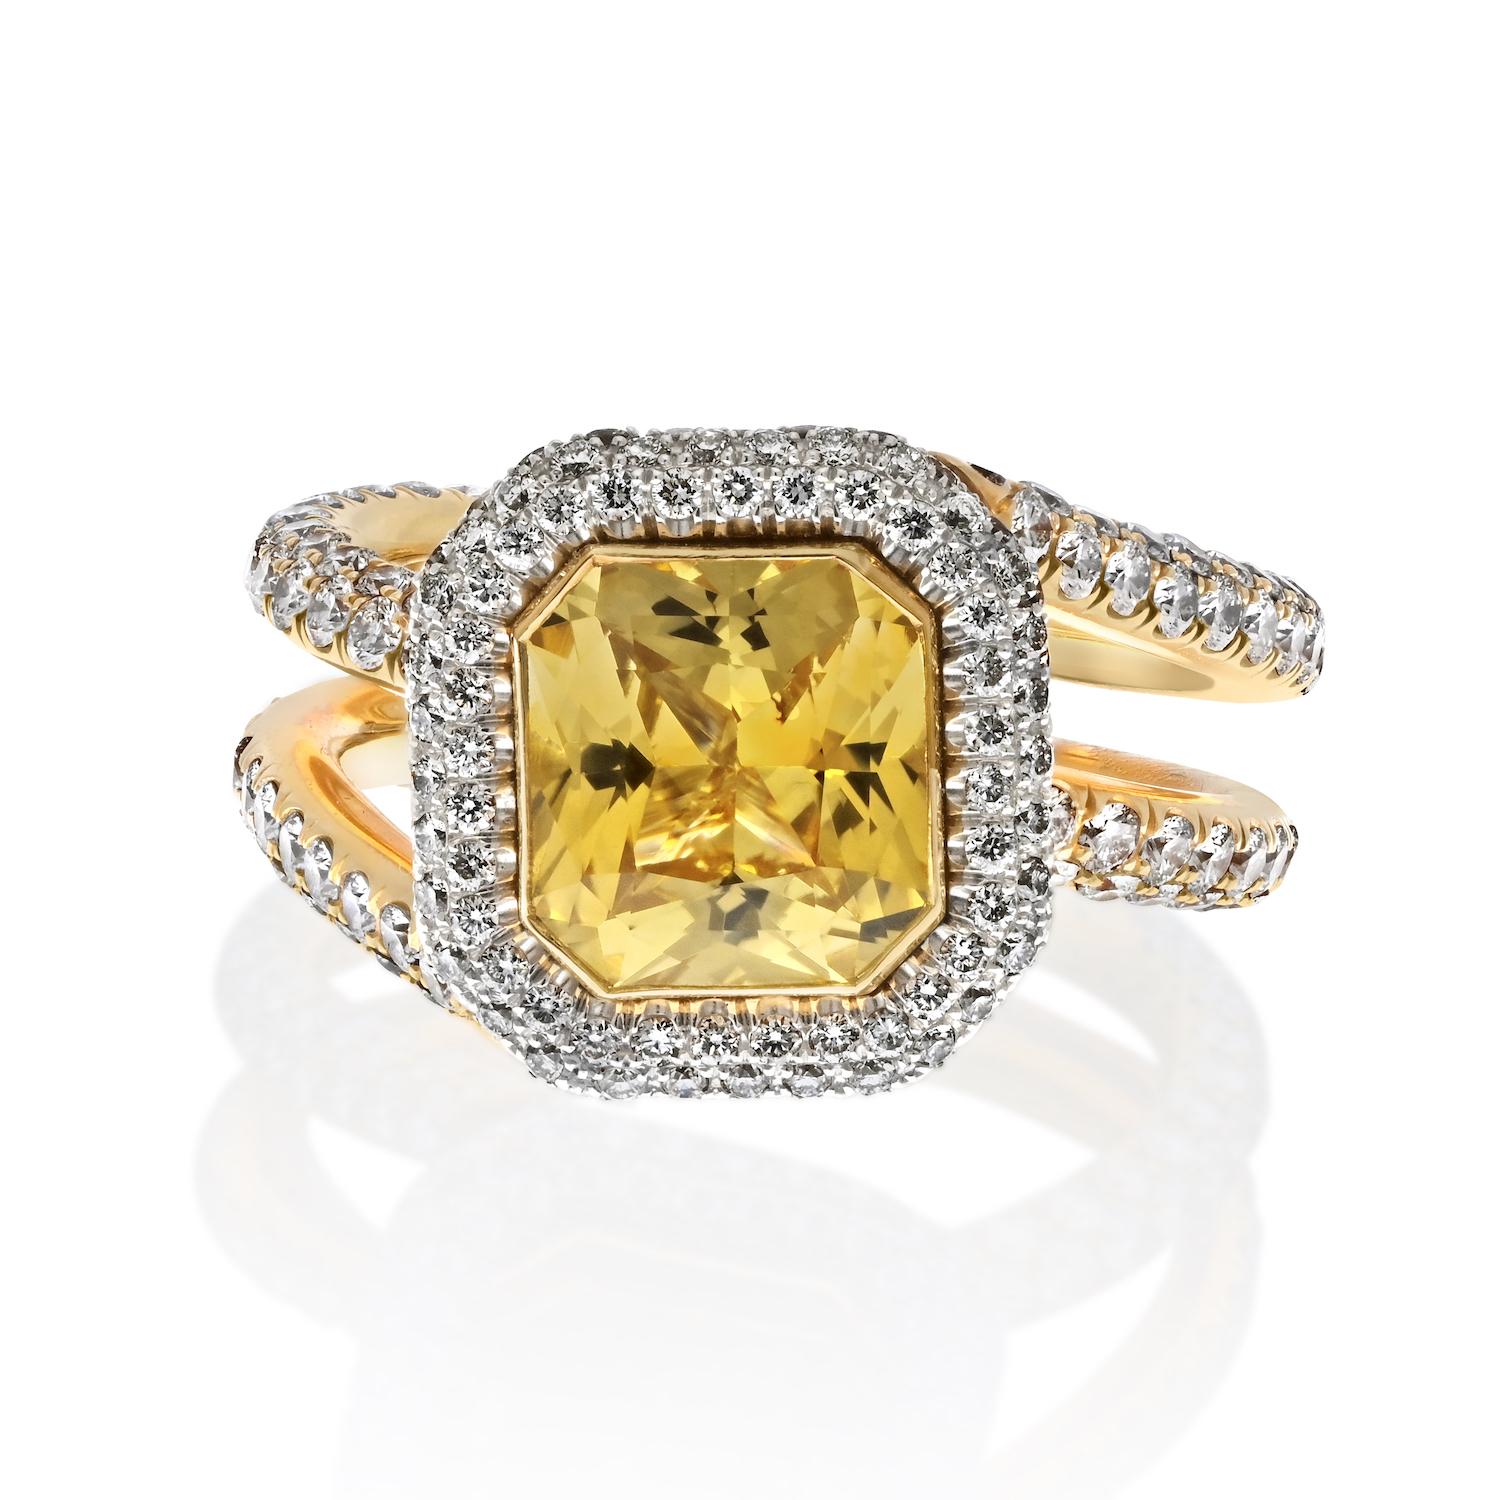 Introducing our stunning handmade diamond and yellow sapphire cocktail ring, a true masterpiece of craftsmanship and design. This exquisite piece is crafted in 18k yellow gold and platinum, featuring a beautiful natural yellow sapphire at its